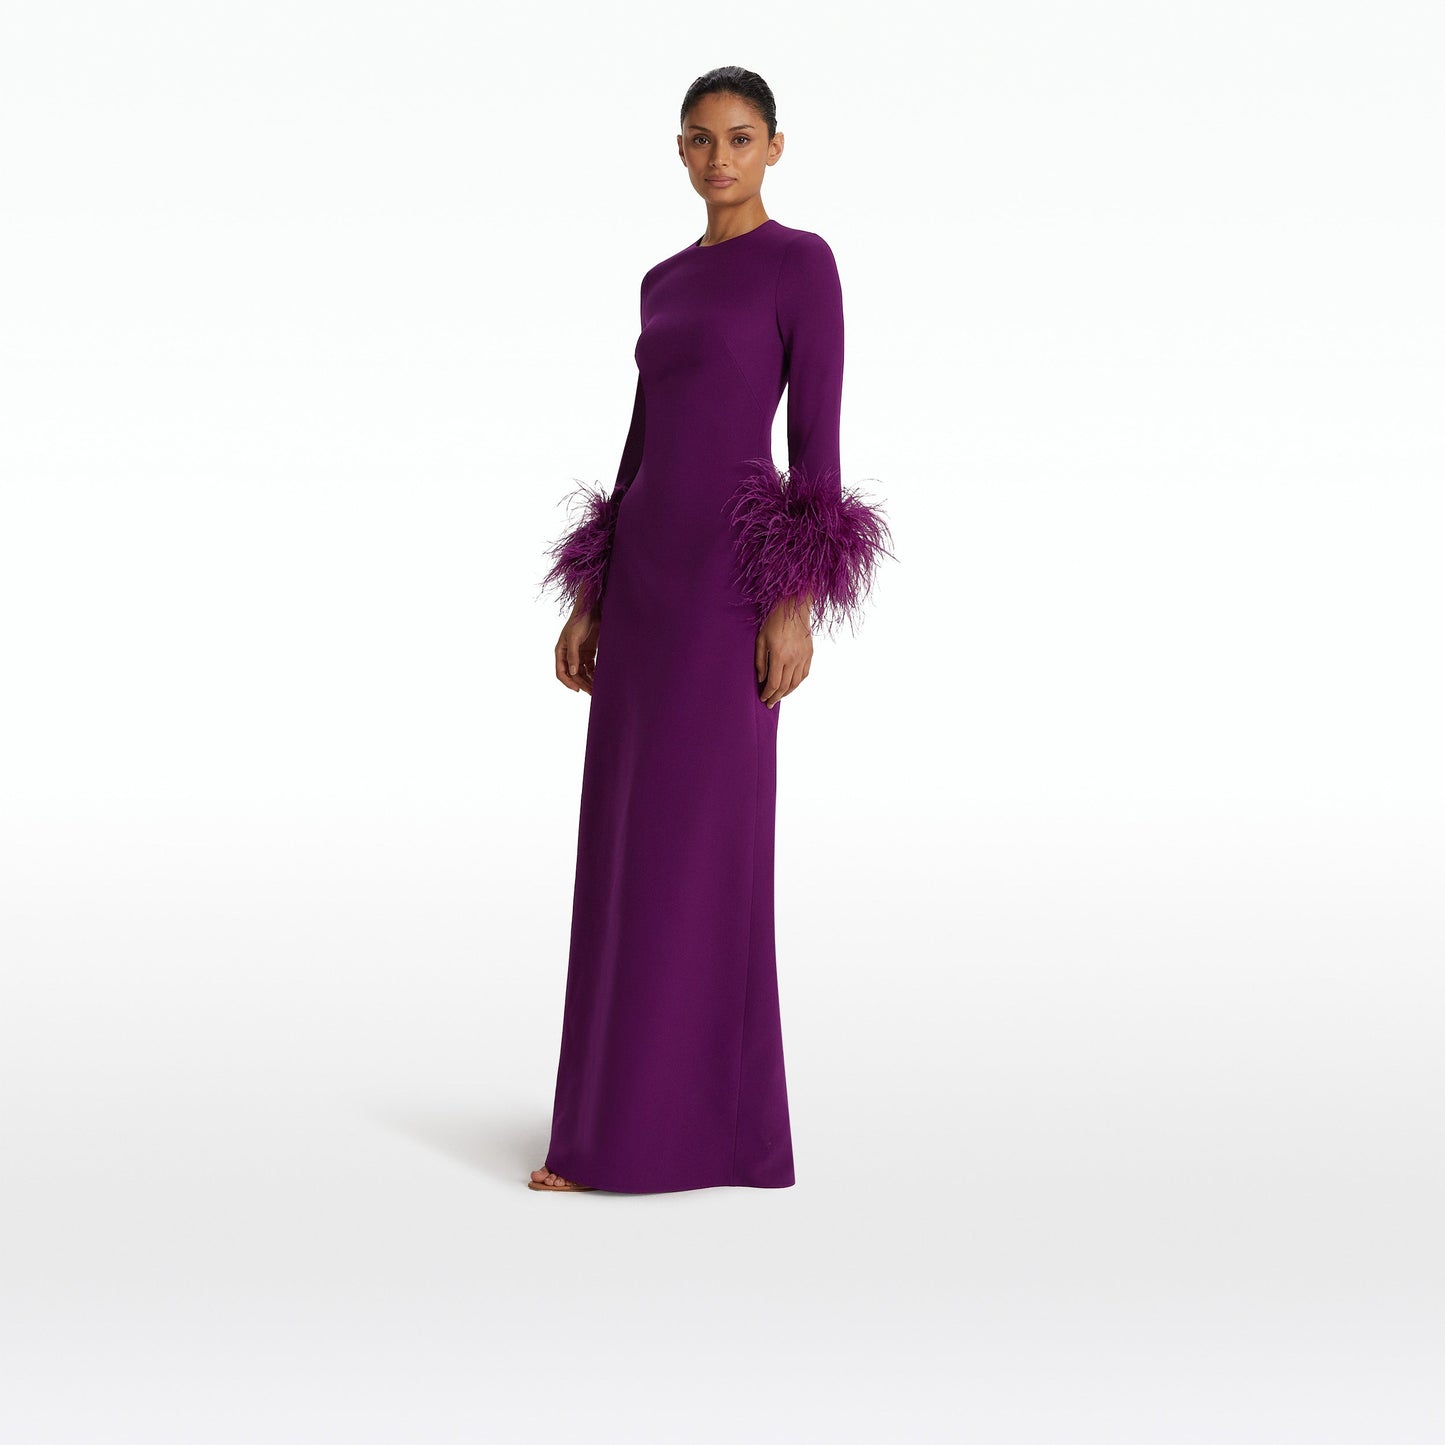 Renalla Currant Feather-Trimmed Long Dress